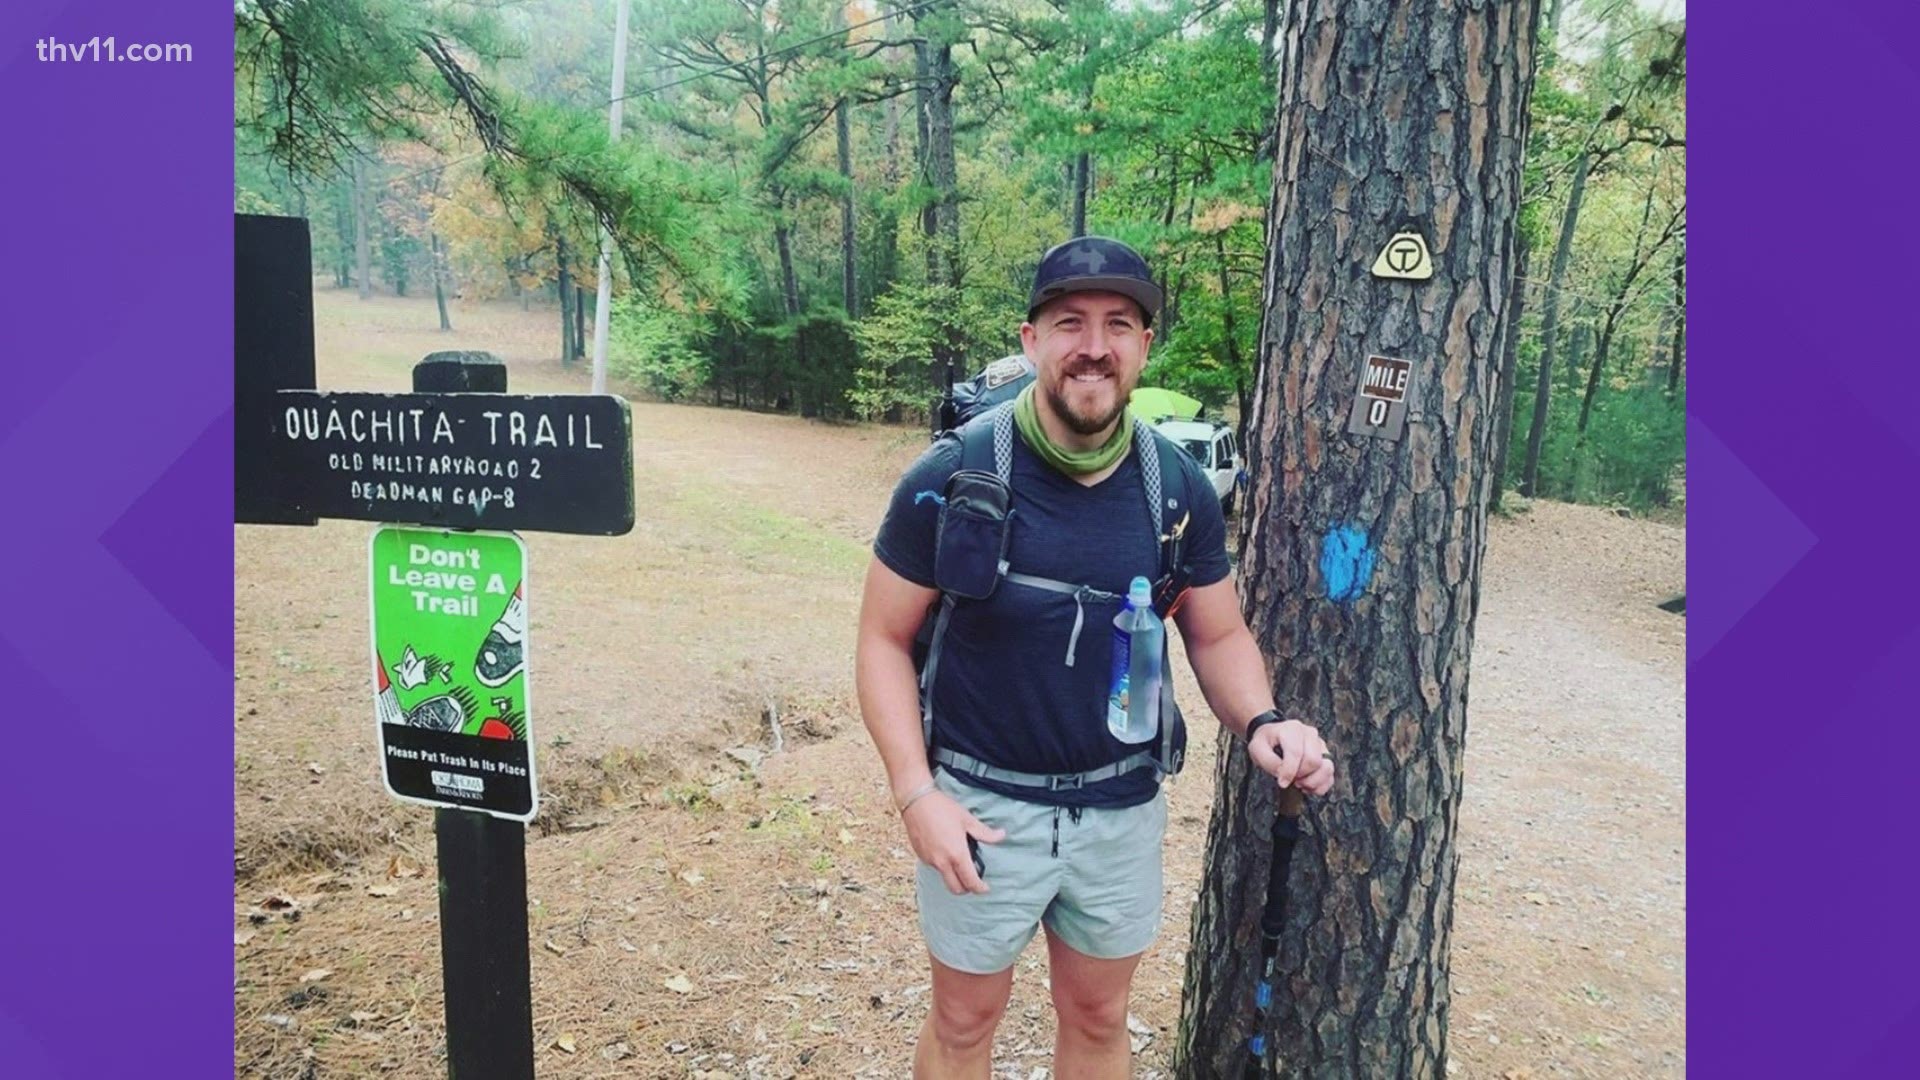 Jeremy Woodall of Monticello is hiking the Ouachita National trail from Oklahoma to Pinnacle Mountain, 223 miles.